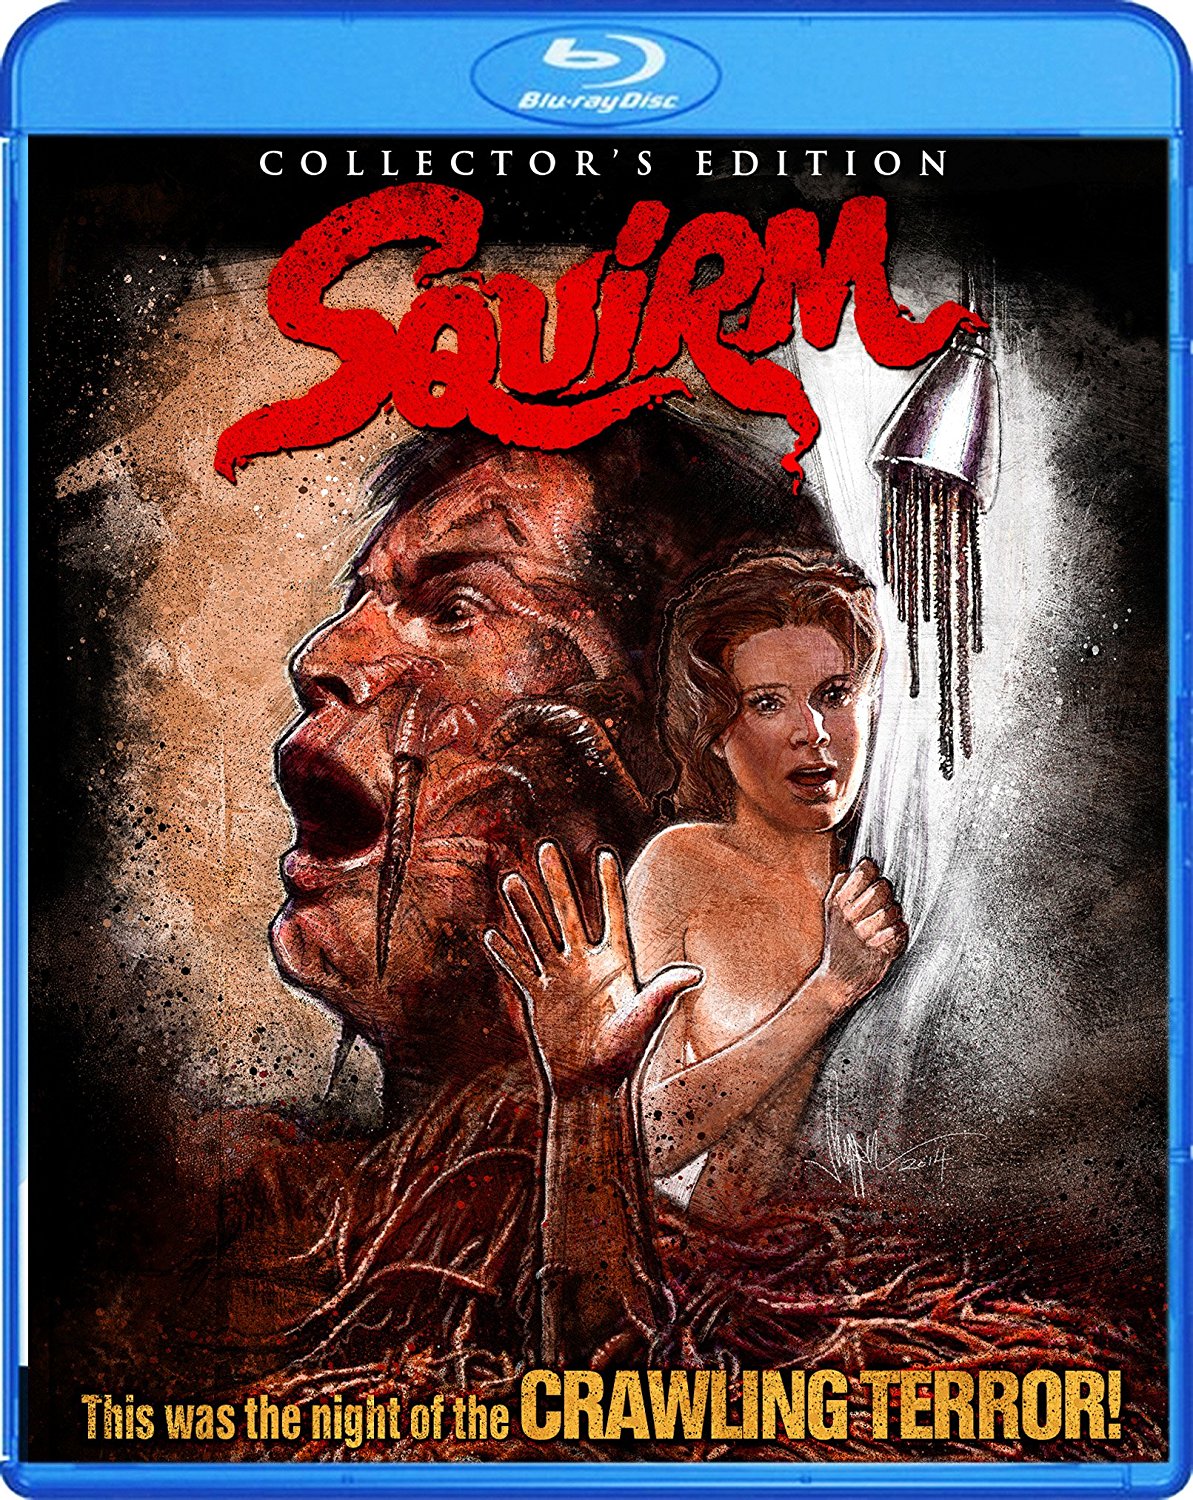 Squirm (1976), Reviewed by: The Masked Reviewer